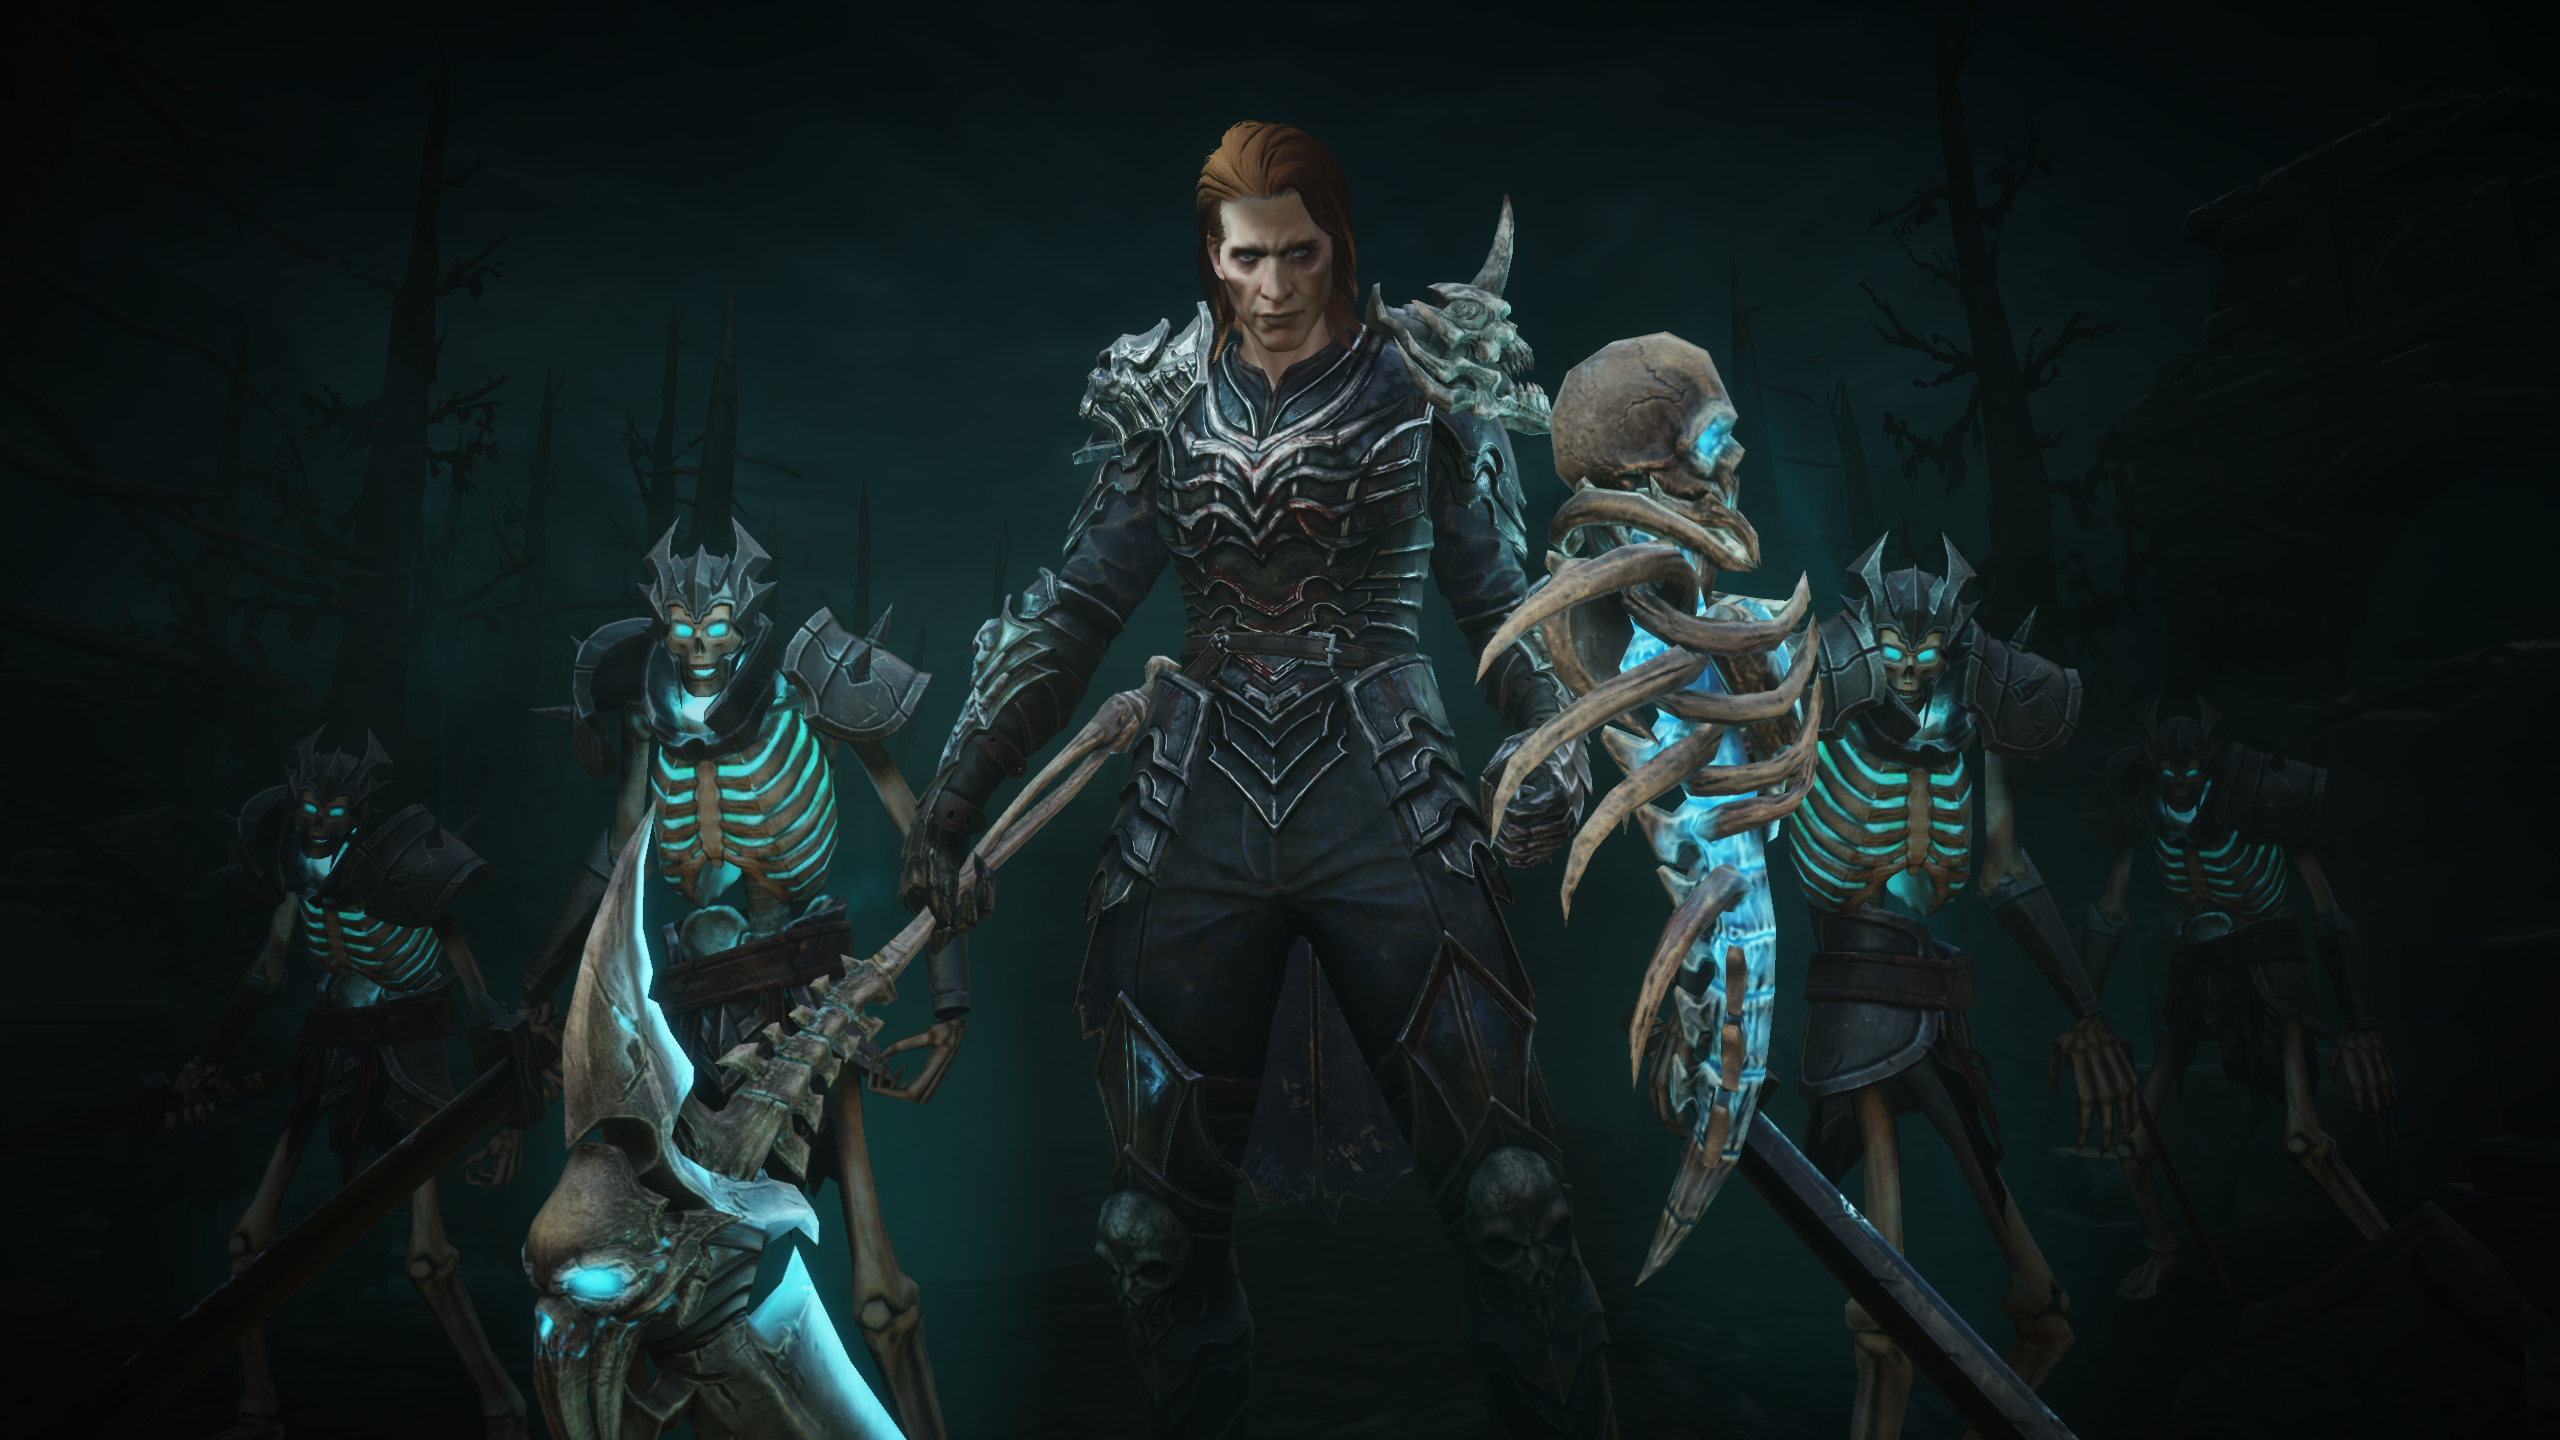 A necromancer, one of the best classes in Diablo Immortal, wielding a scythe and commanding four skeletons